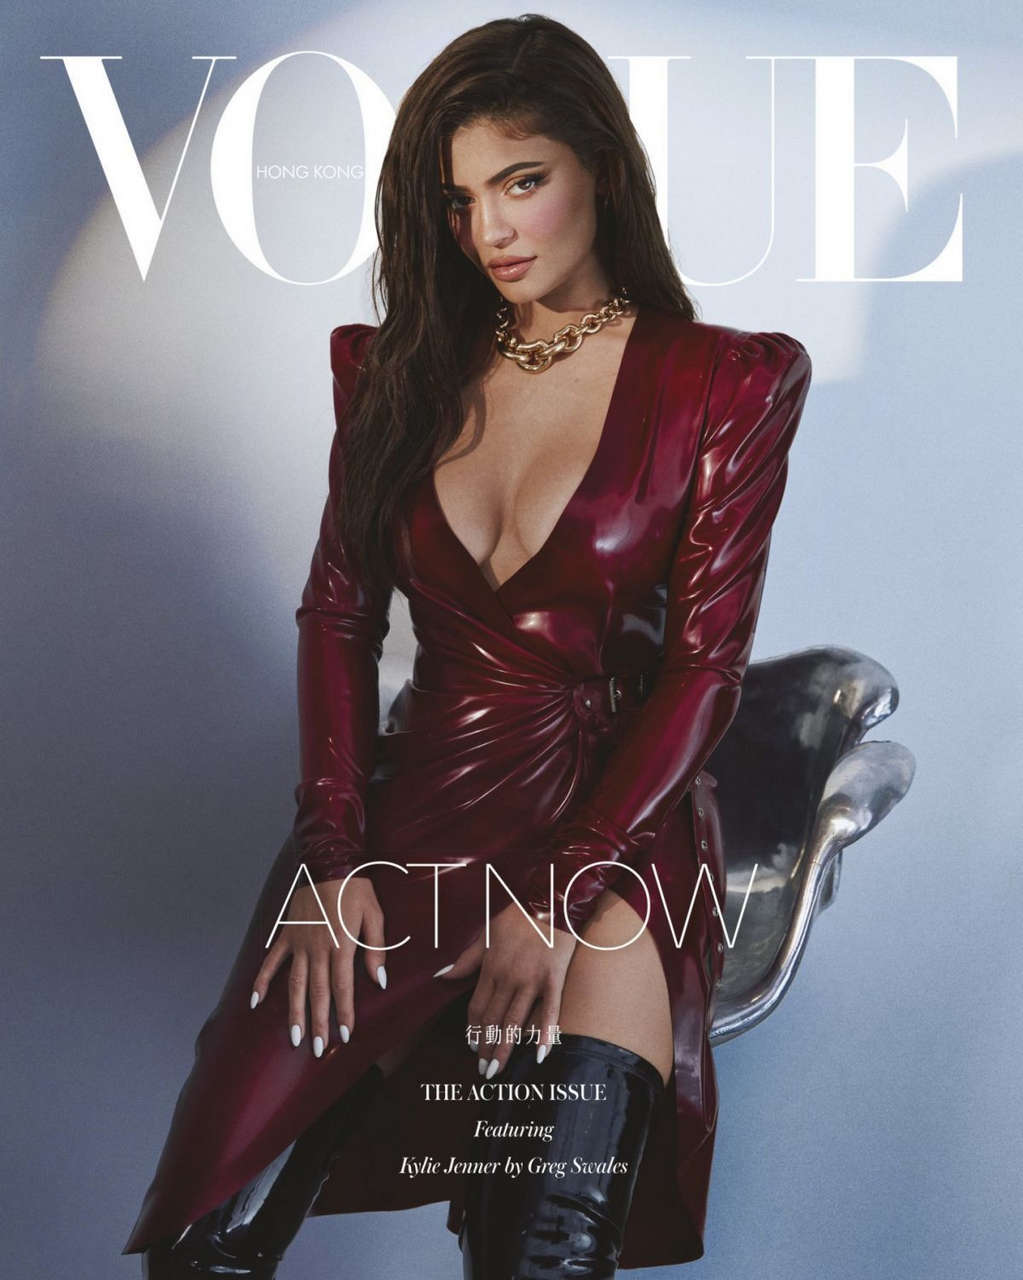 Kylie Jenner Vogue Magazine Hong Kong August 2020 Issue